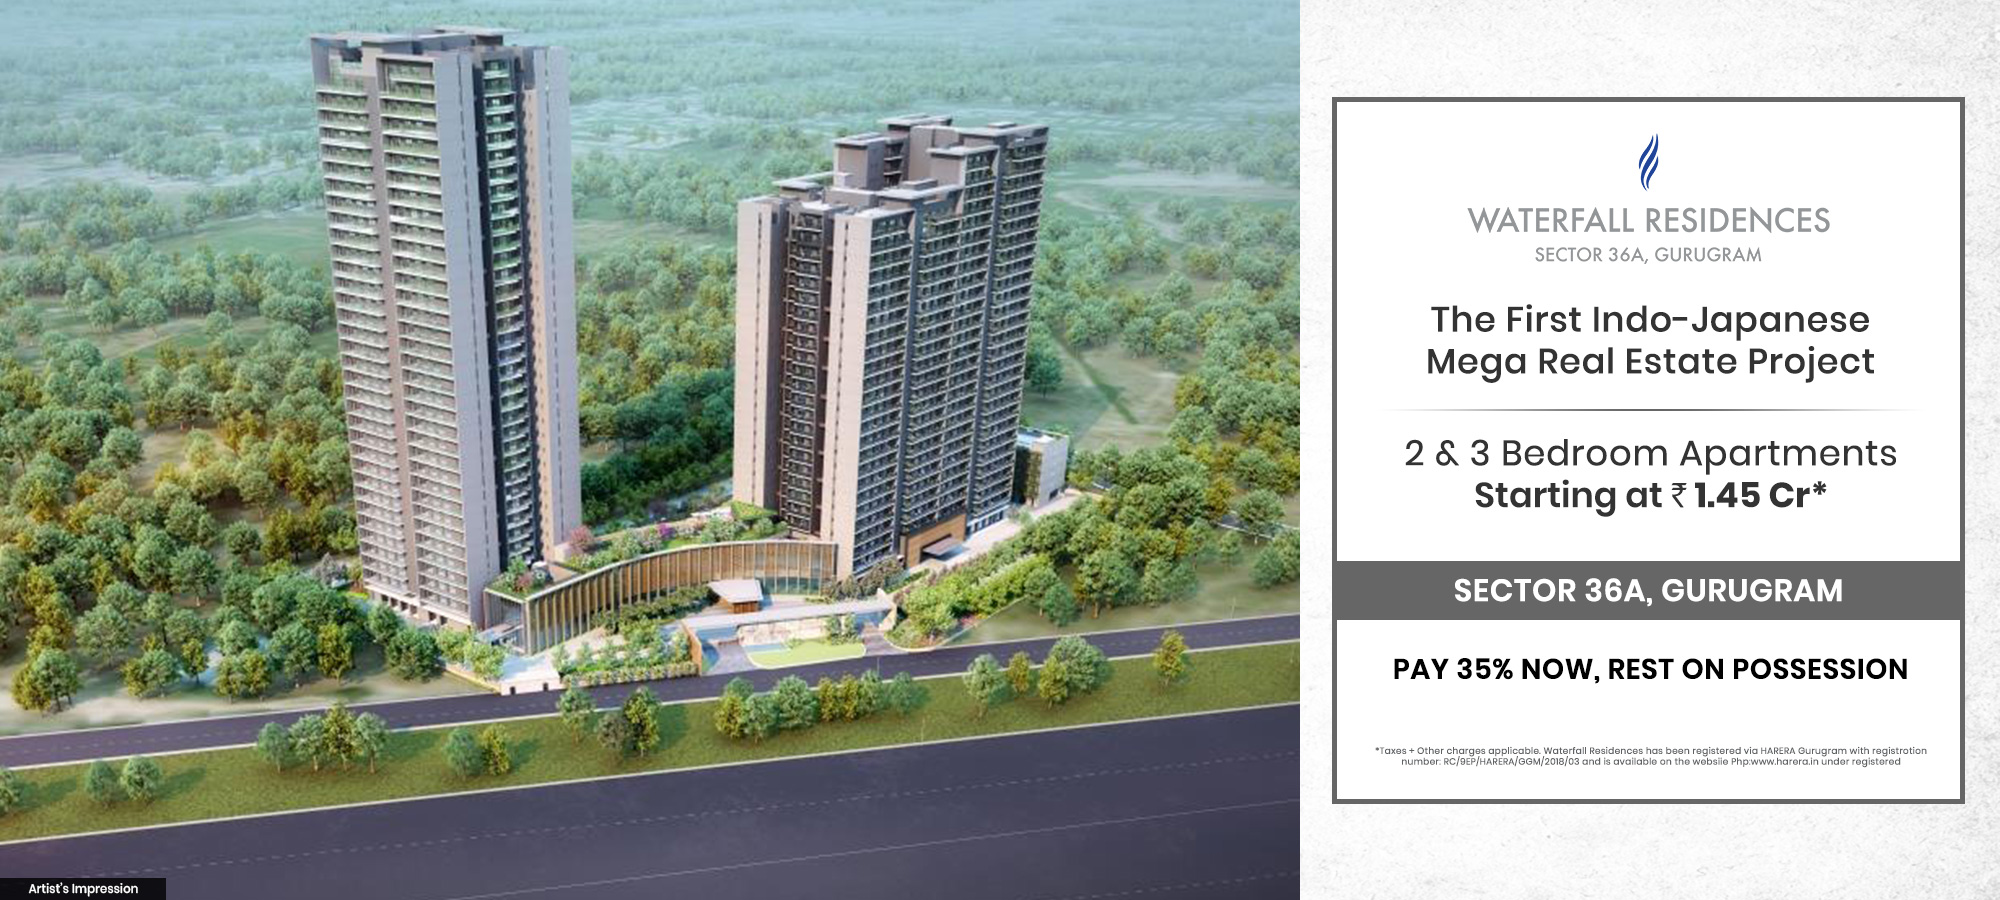 Pay 35% now, rest on possession at Krisumi Waterfall Residences, Gurgaon